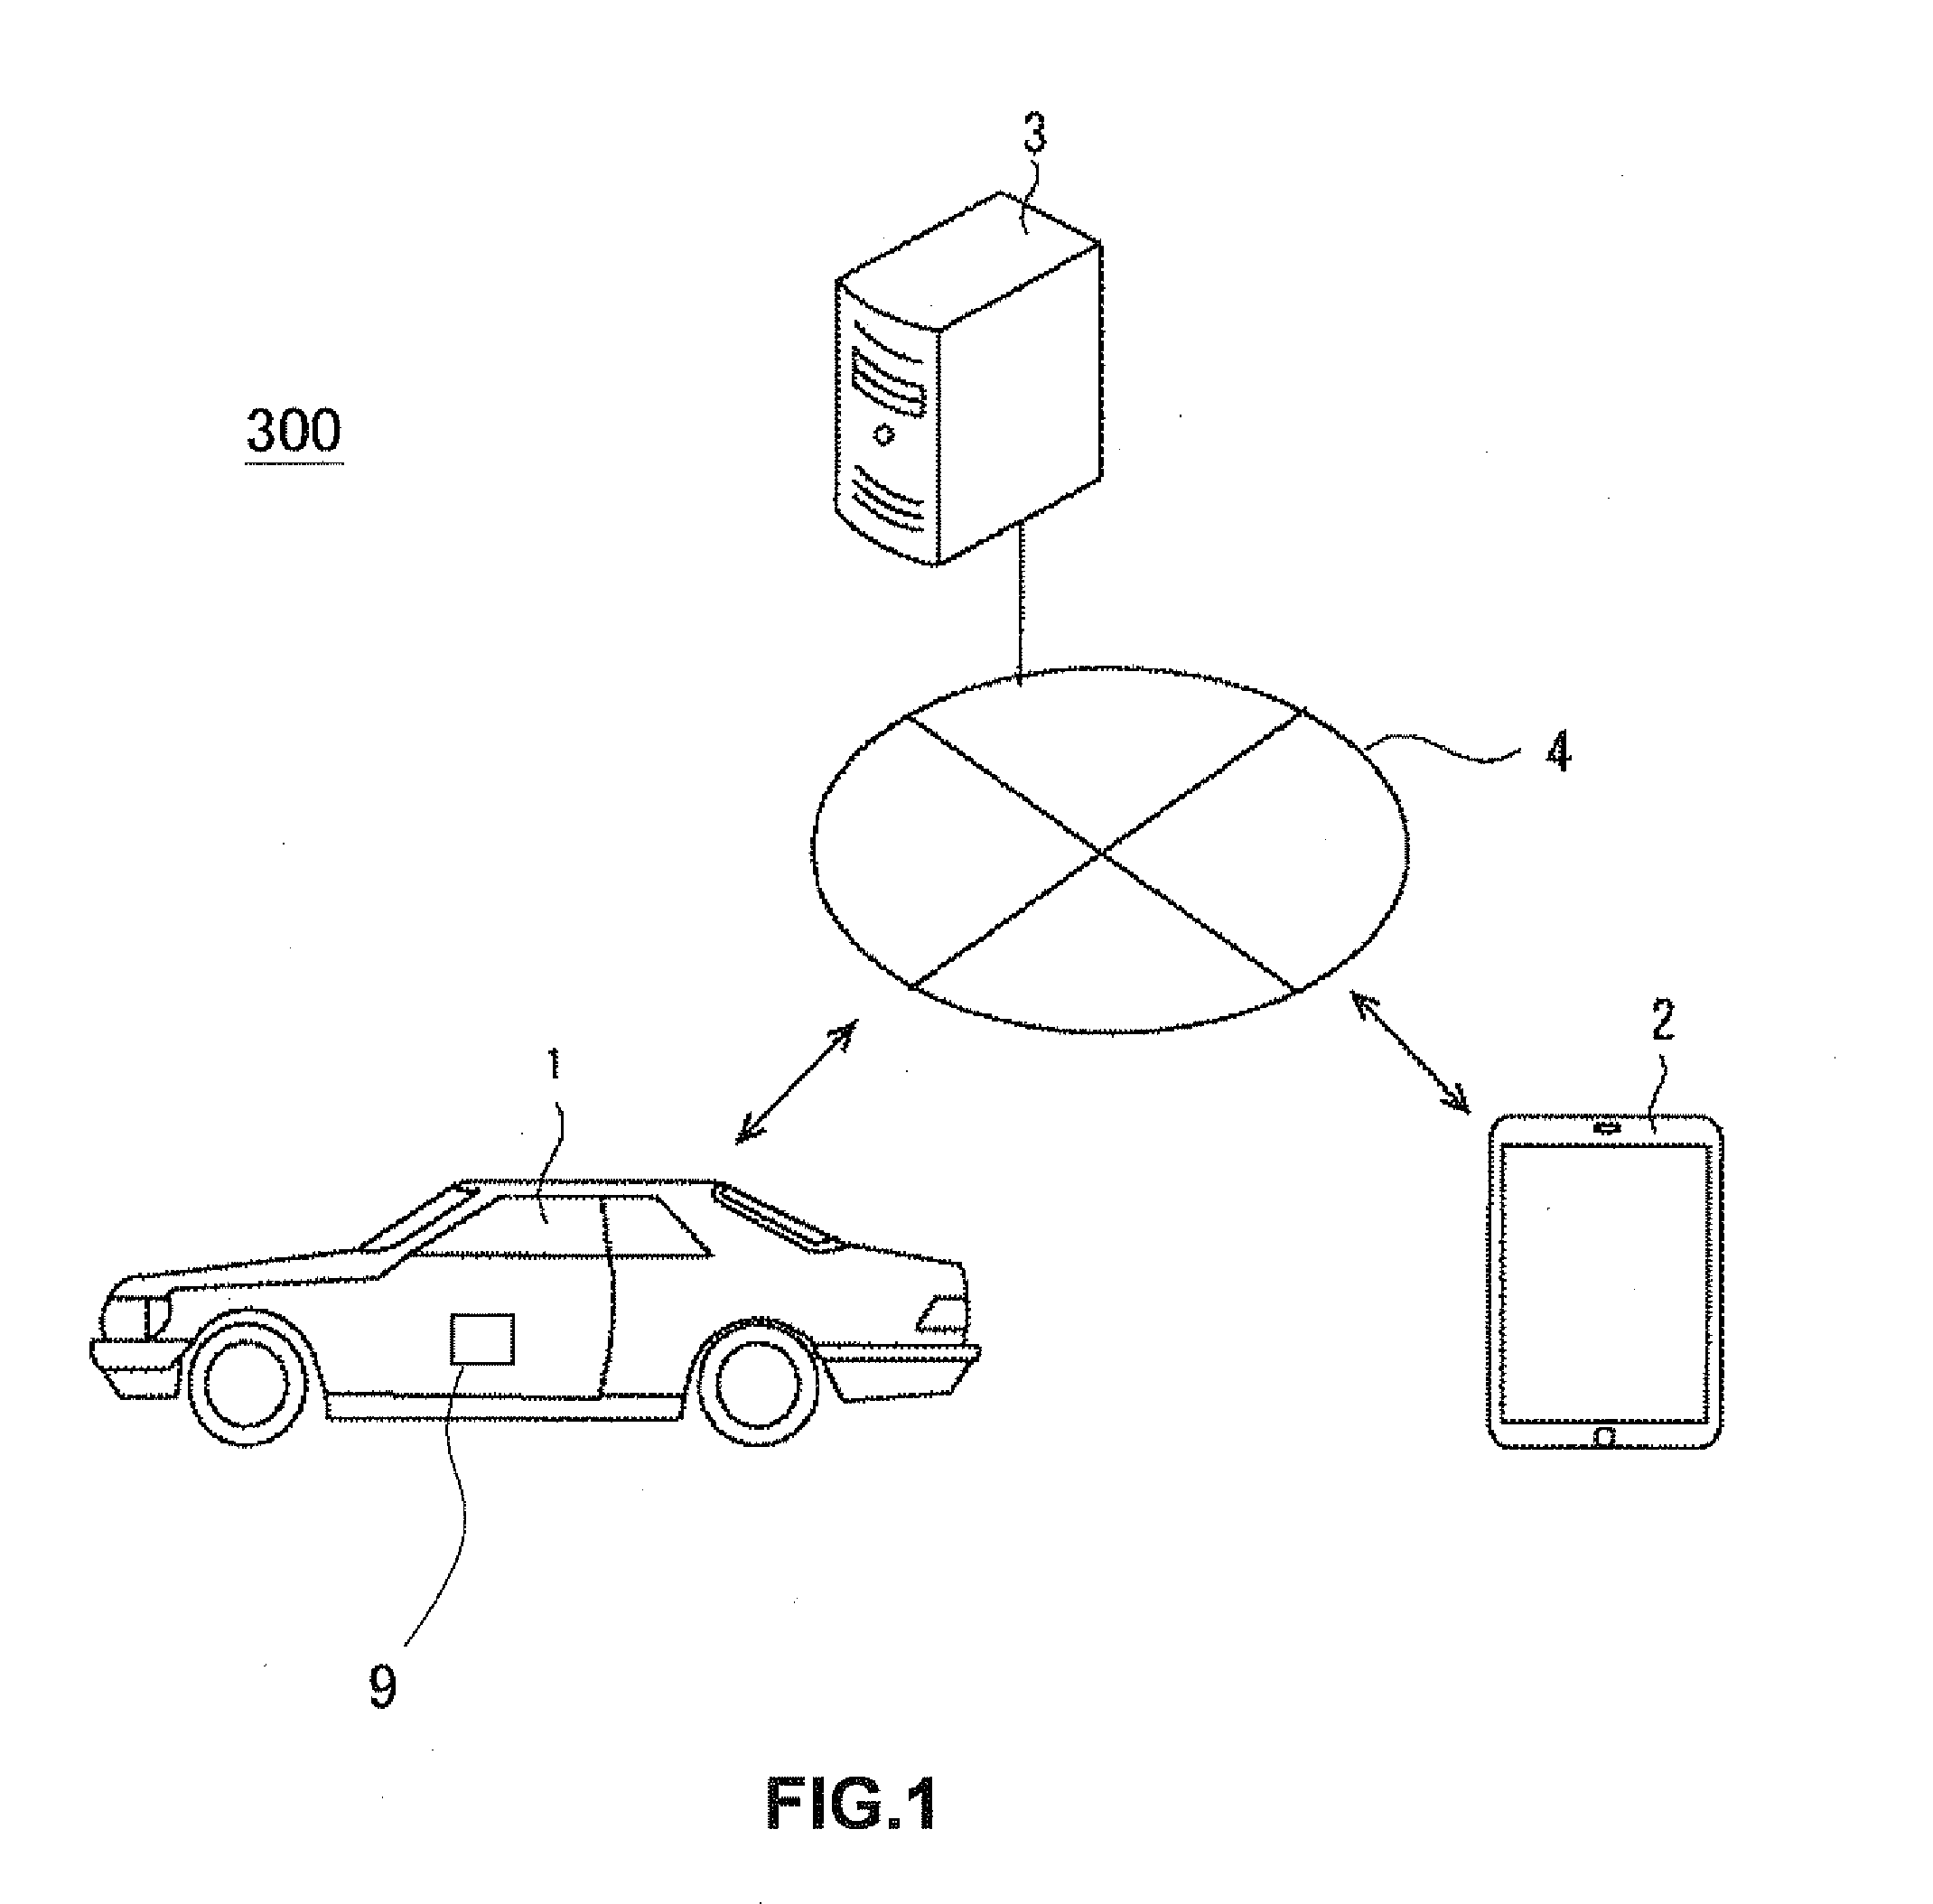 In-vehicle apparatus